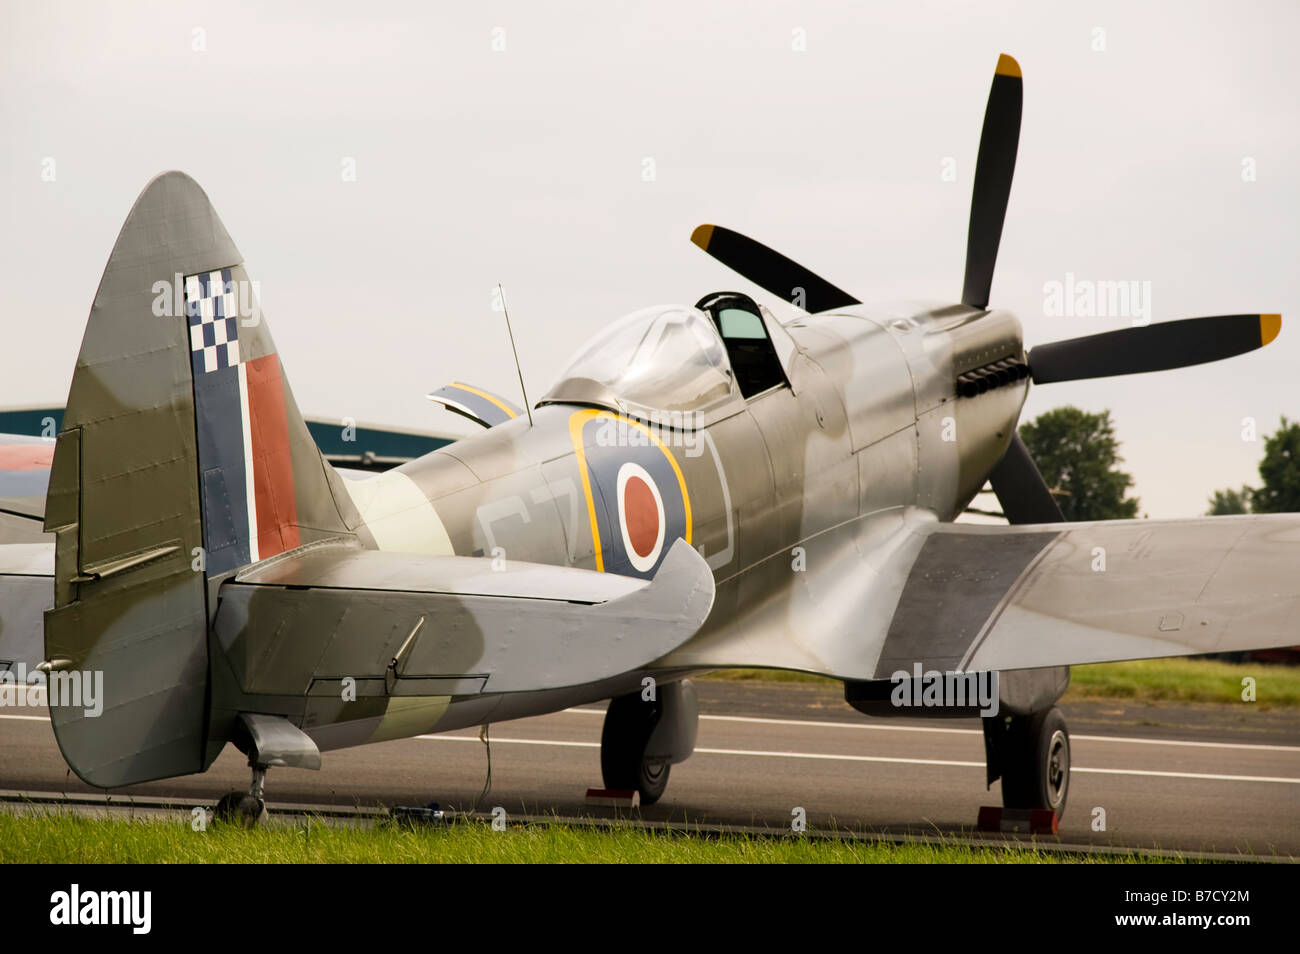 Supermarine Spitfire fighter plane parked on the runway at Biggin Hill Airshow, 2008 Stock Photo